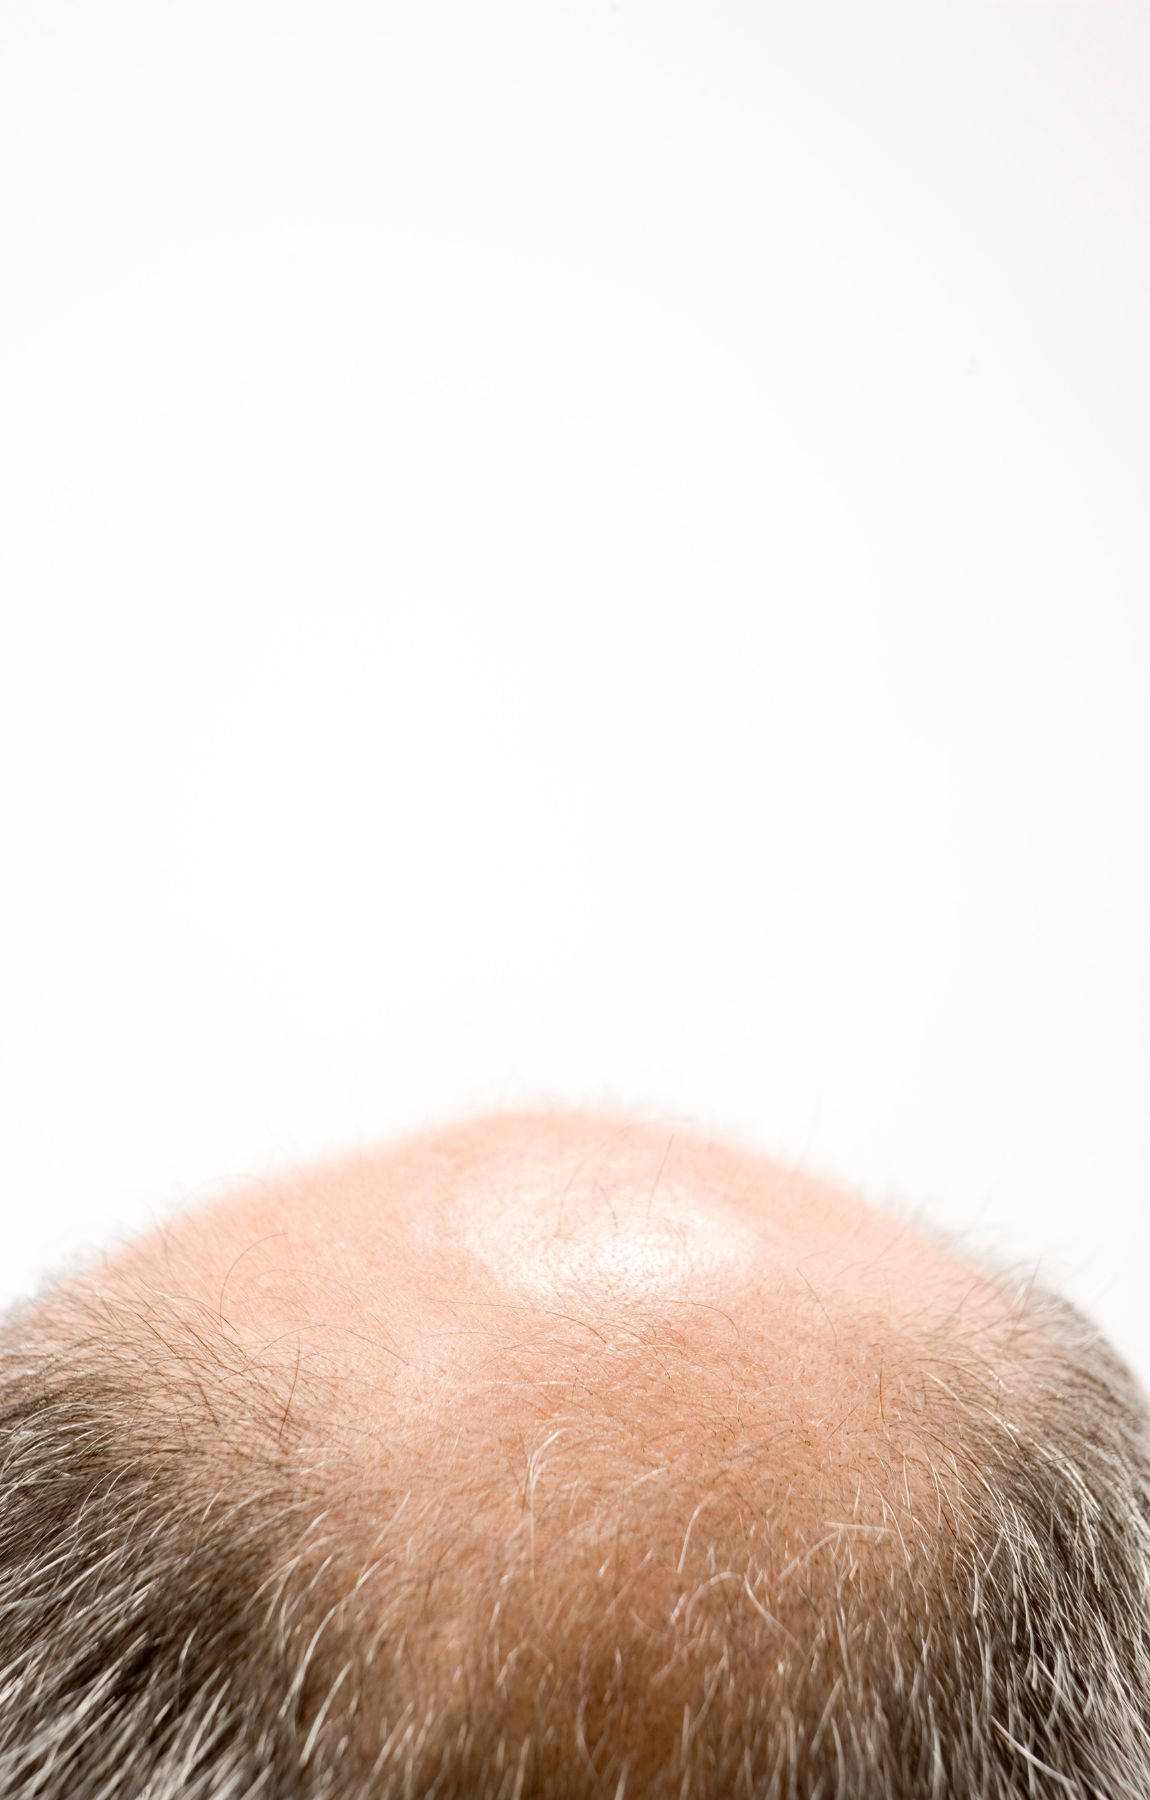 Bald Man With Thinning White Hair Picture